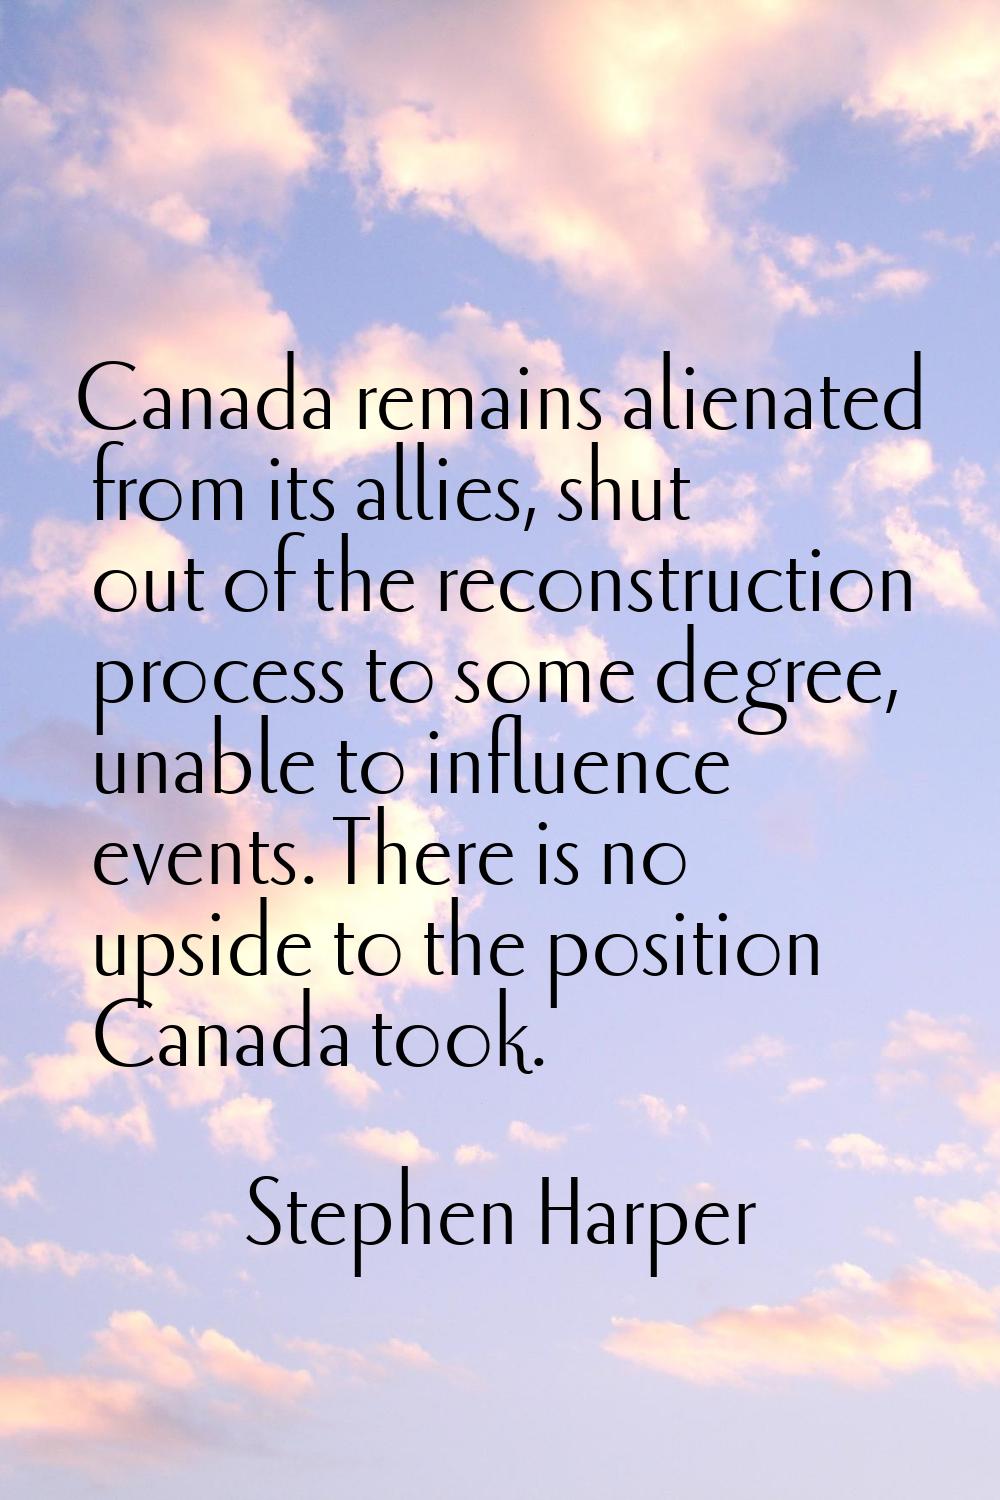 Canada remains alienated from its allies, shut out of the reconstruction process to some degree, un